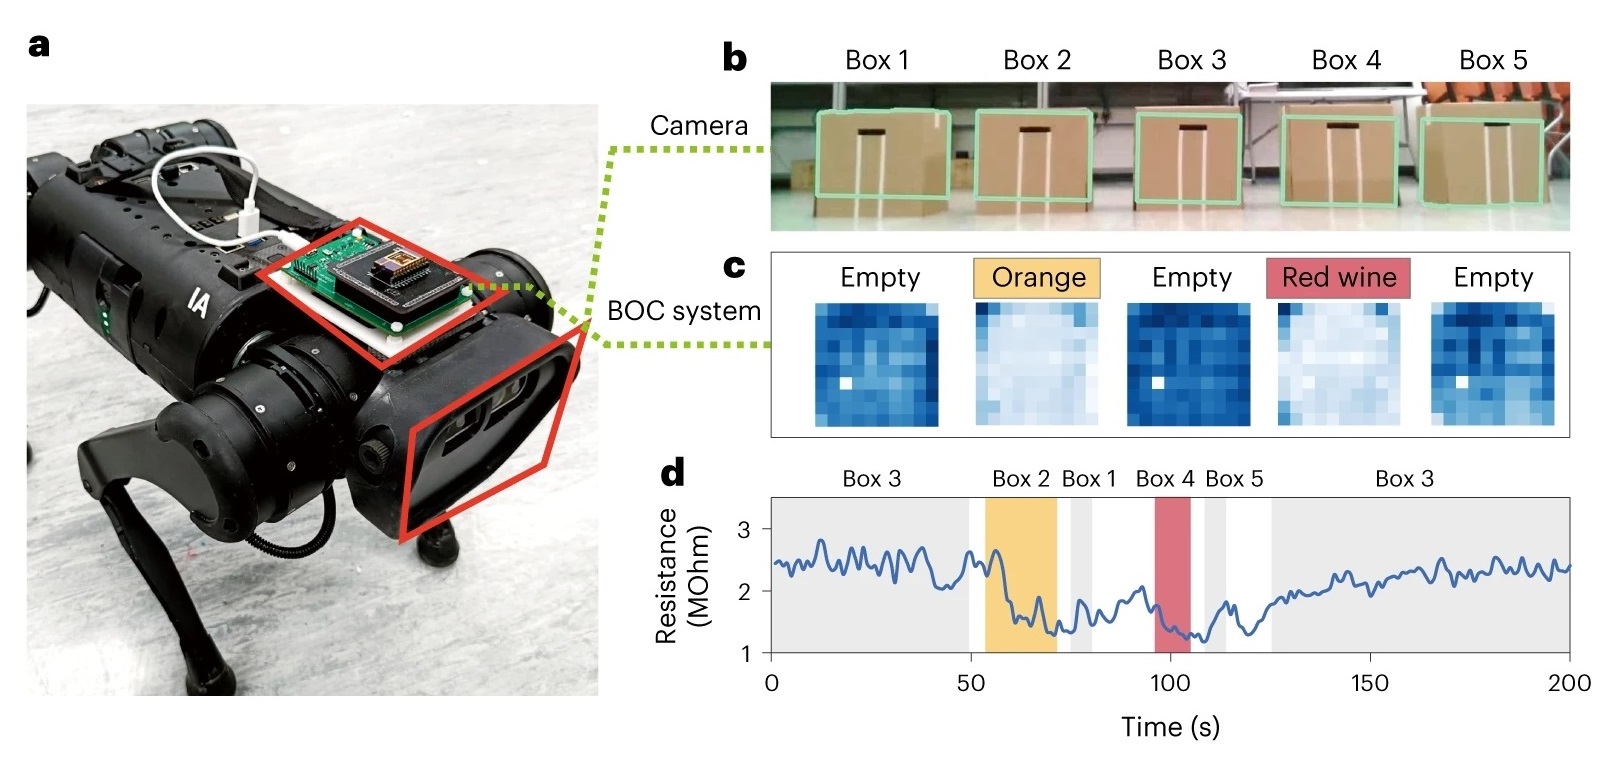 Configuration of Prof. Fan’s biomimetic olfactory chip (BOC) system installed on a robot dog for blind box differentiation